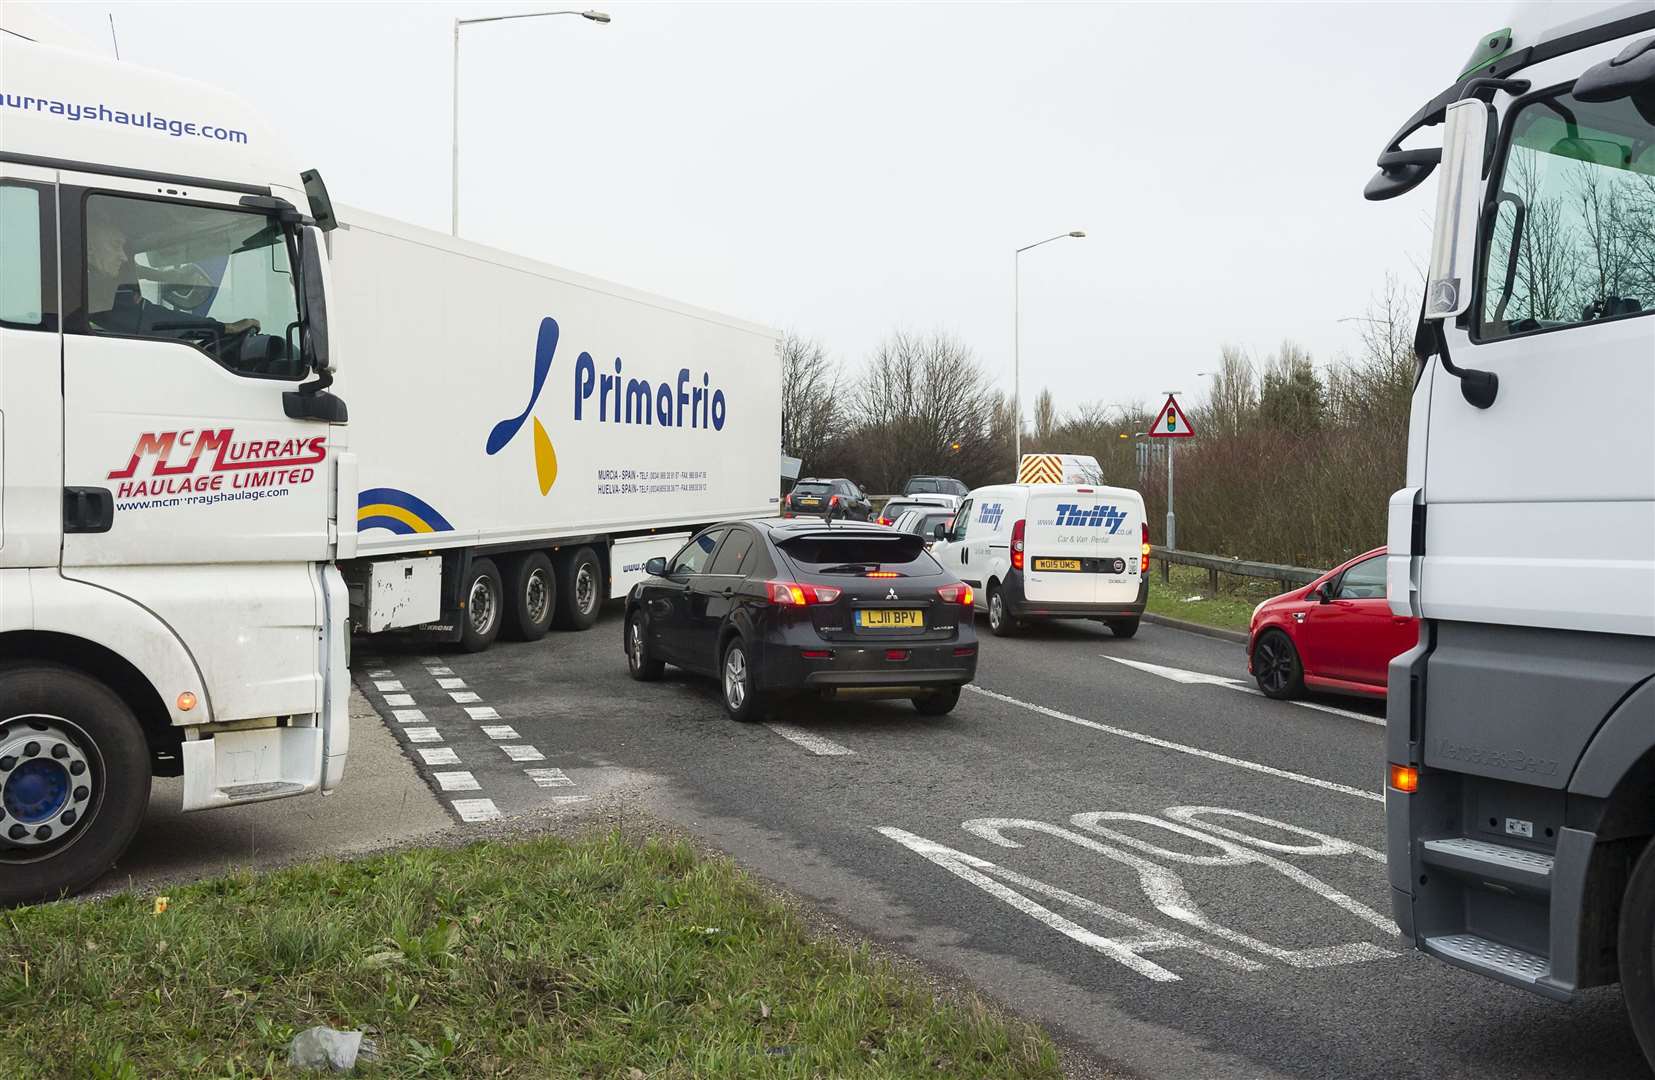 Brenley Corner links the M2, A2 and Thanet Way, but regularly becomes congested